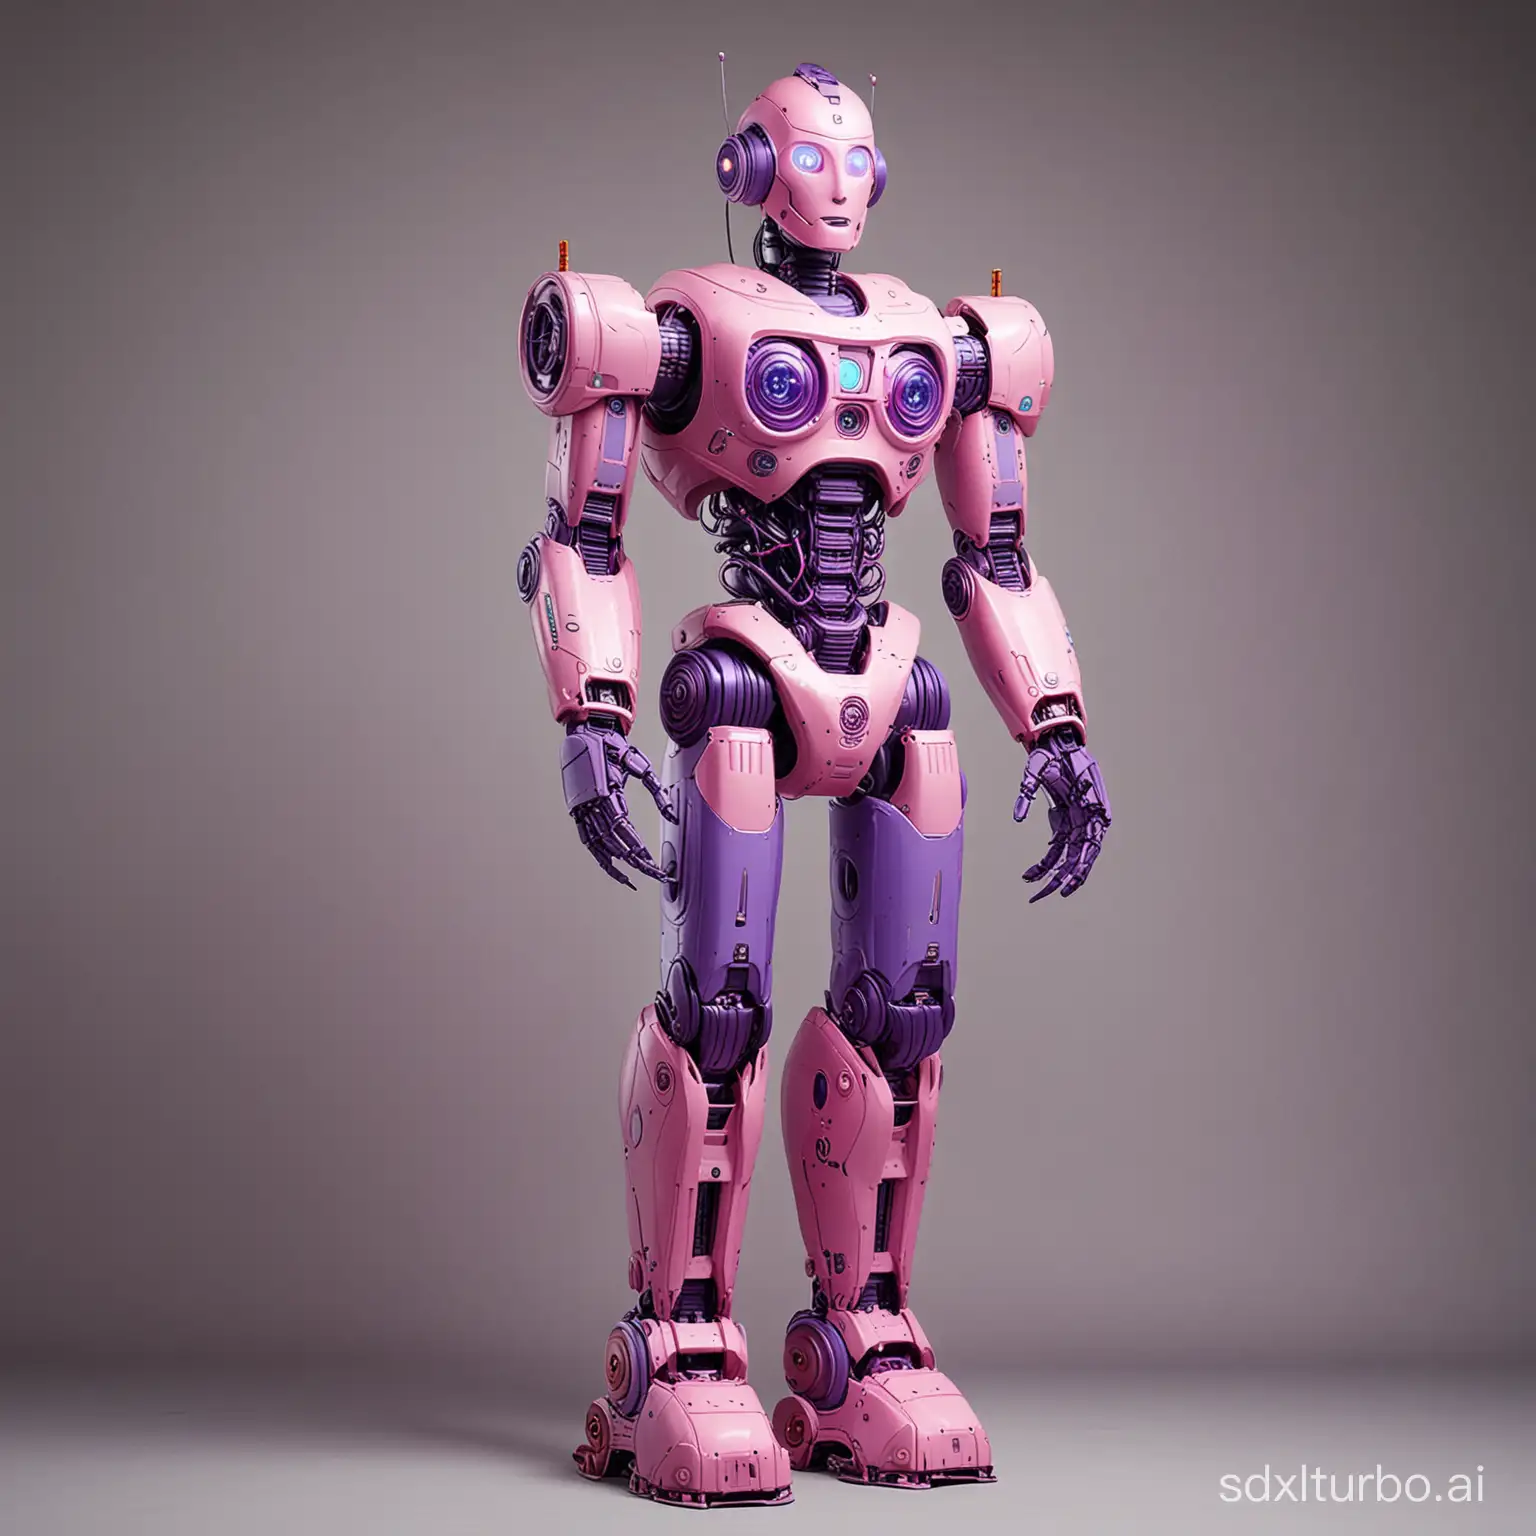 10 foot tall pink and purple robot named Nimrod